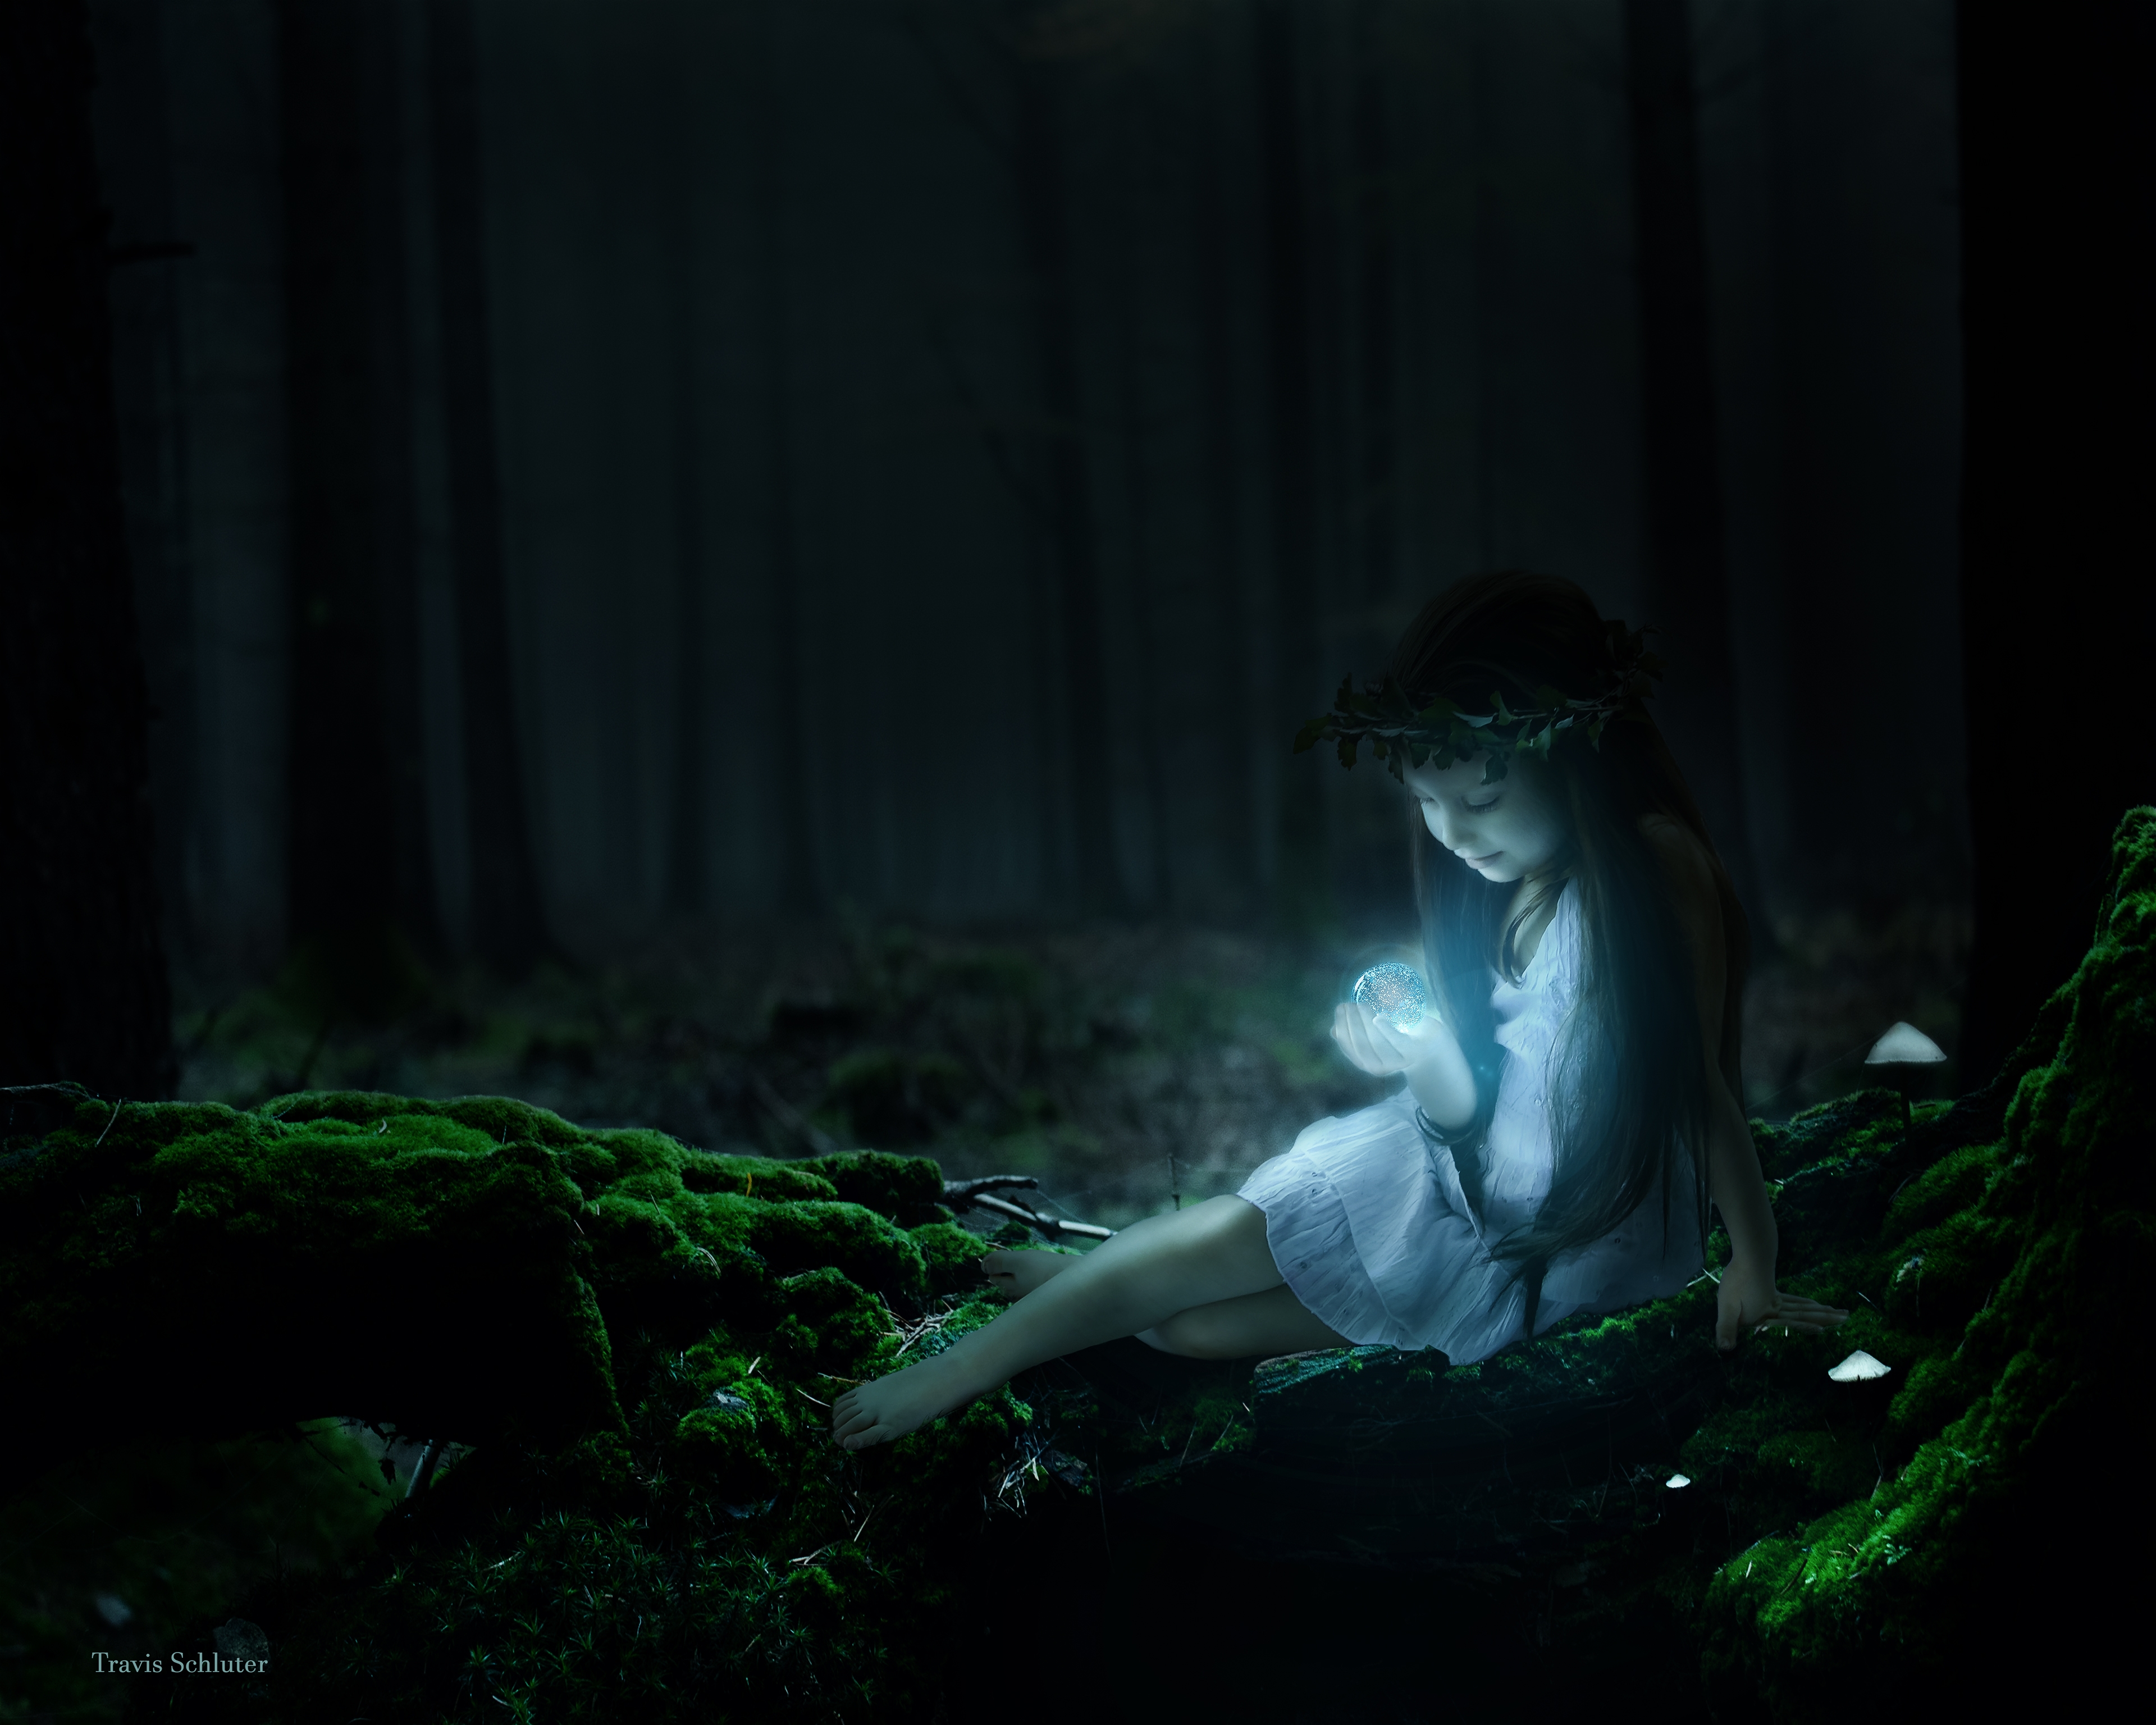 HD wallpaper, Dark, Magical, Enchanted, Smiling Girl, Fairy, Surreal, Night, Glowing, Cute Girl, Forest